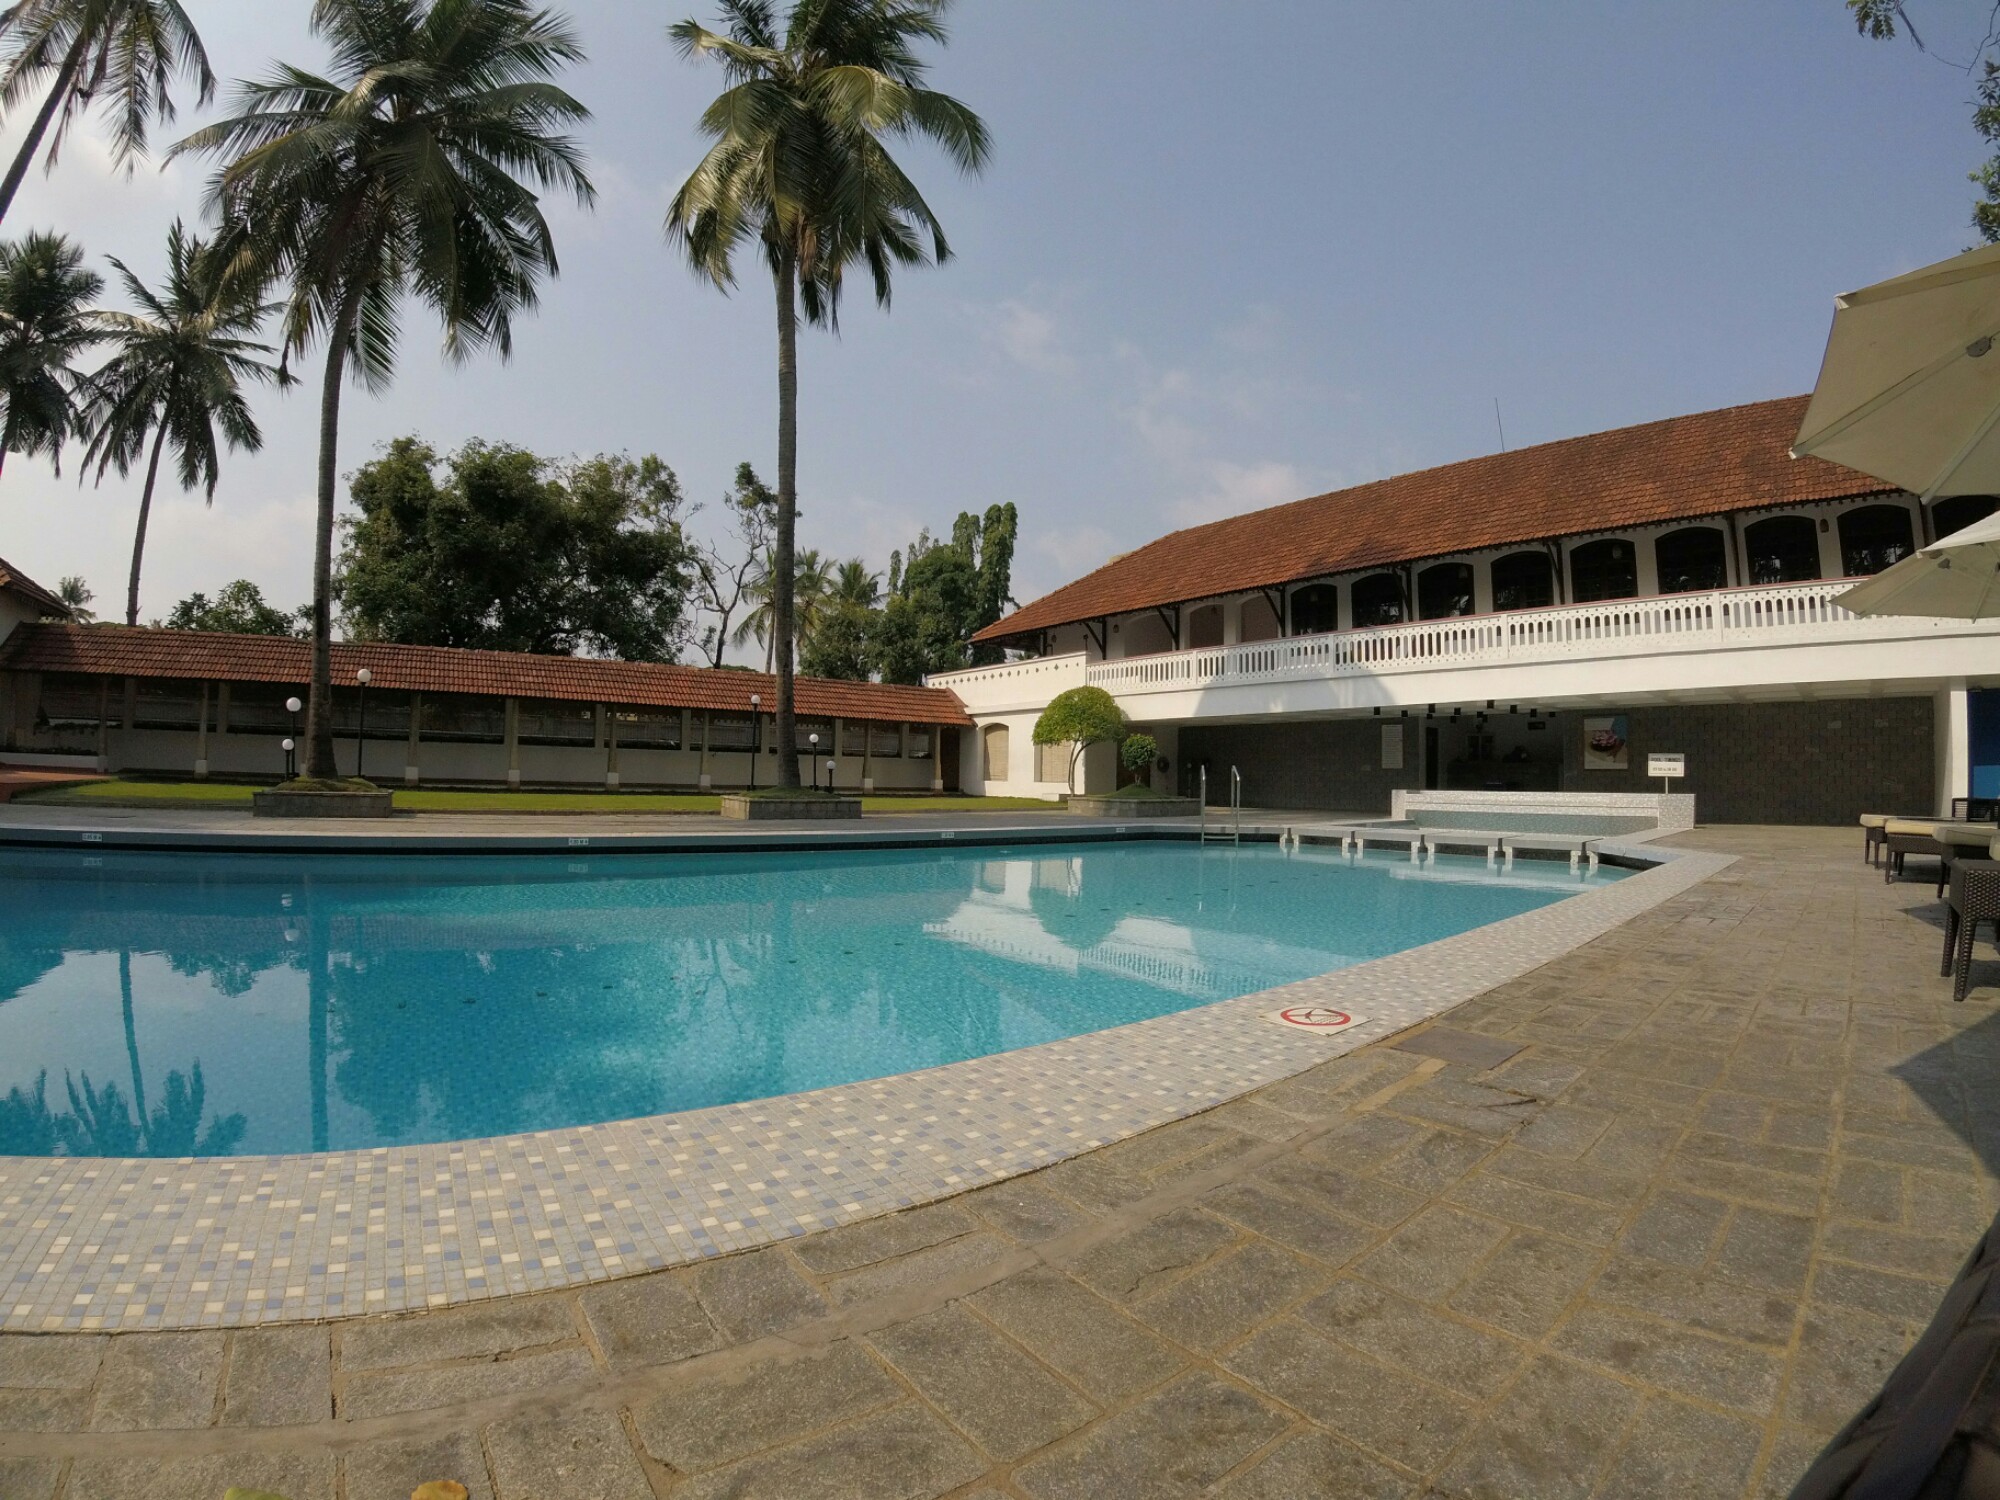 The pool at the Casino Hotel in Cochin